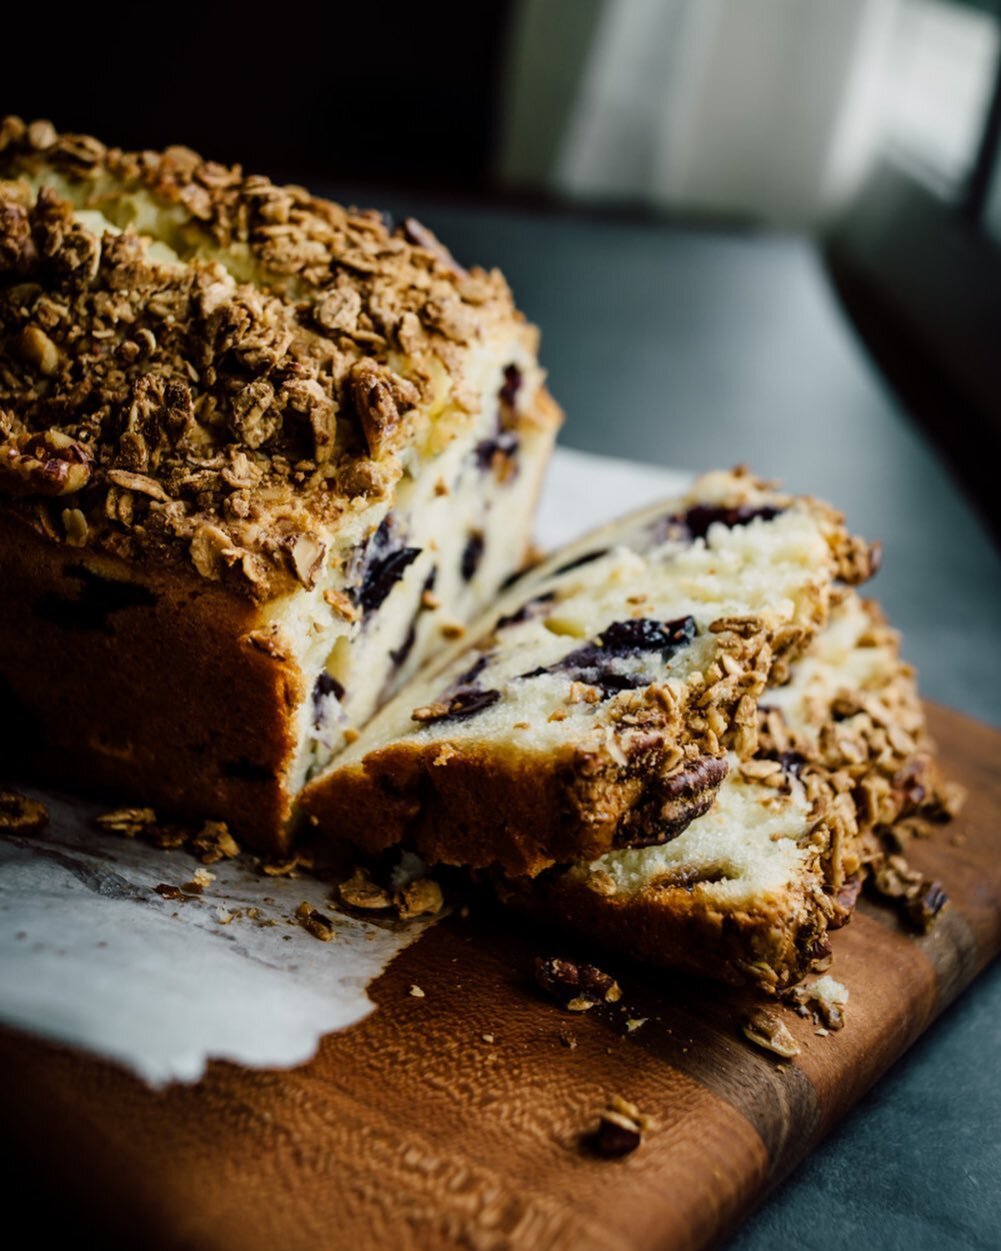 New post on the blog today with a Blueberry Granola Loaf Cake! I love the crunchy topping and it makes it kinda breakfasty. 😃
.
.
.
.
.

#loafcake #blueberries #granola #f52grams #thekitchn #huffposttaste #feedfeed #foodandwine #bareaders #bonappeti